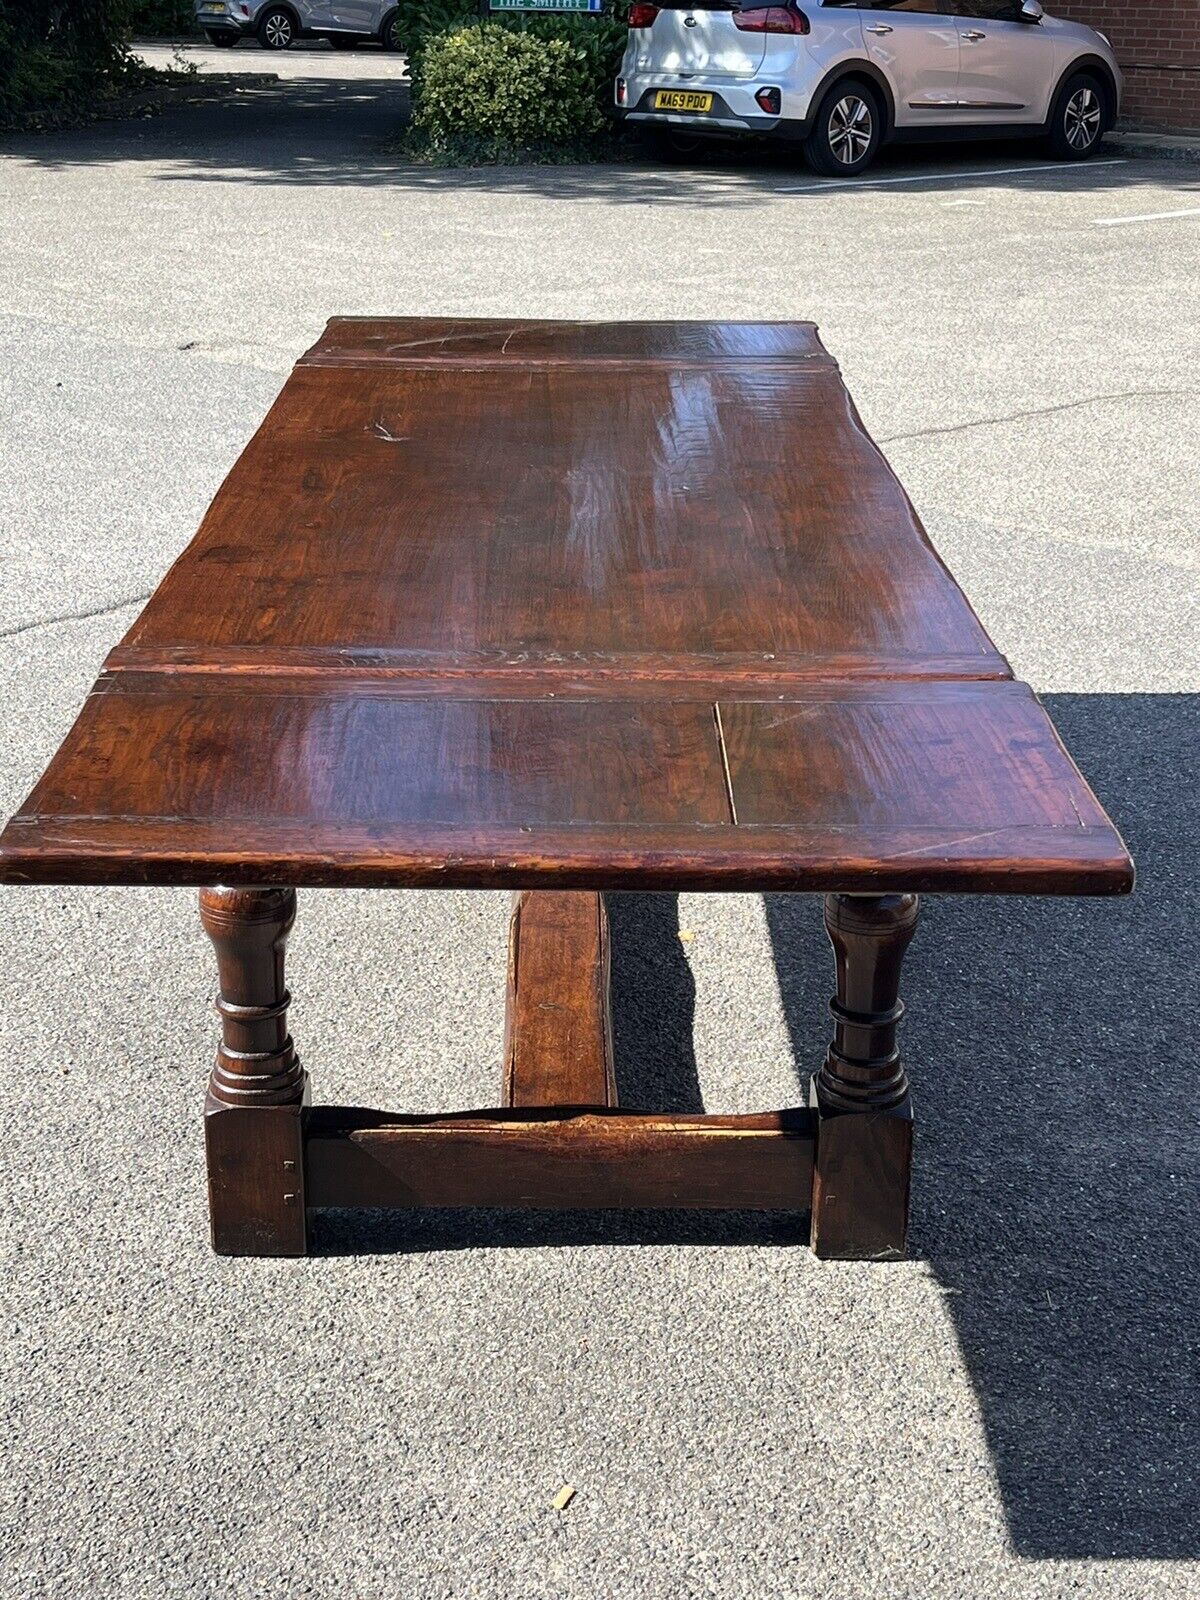 Solid Oak Extending Plank Top Refectory Dining Table & 10 Chairs.